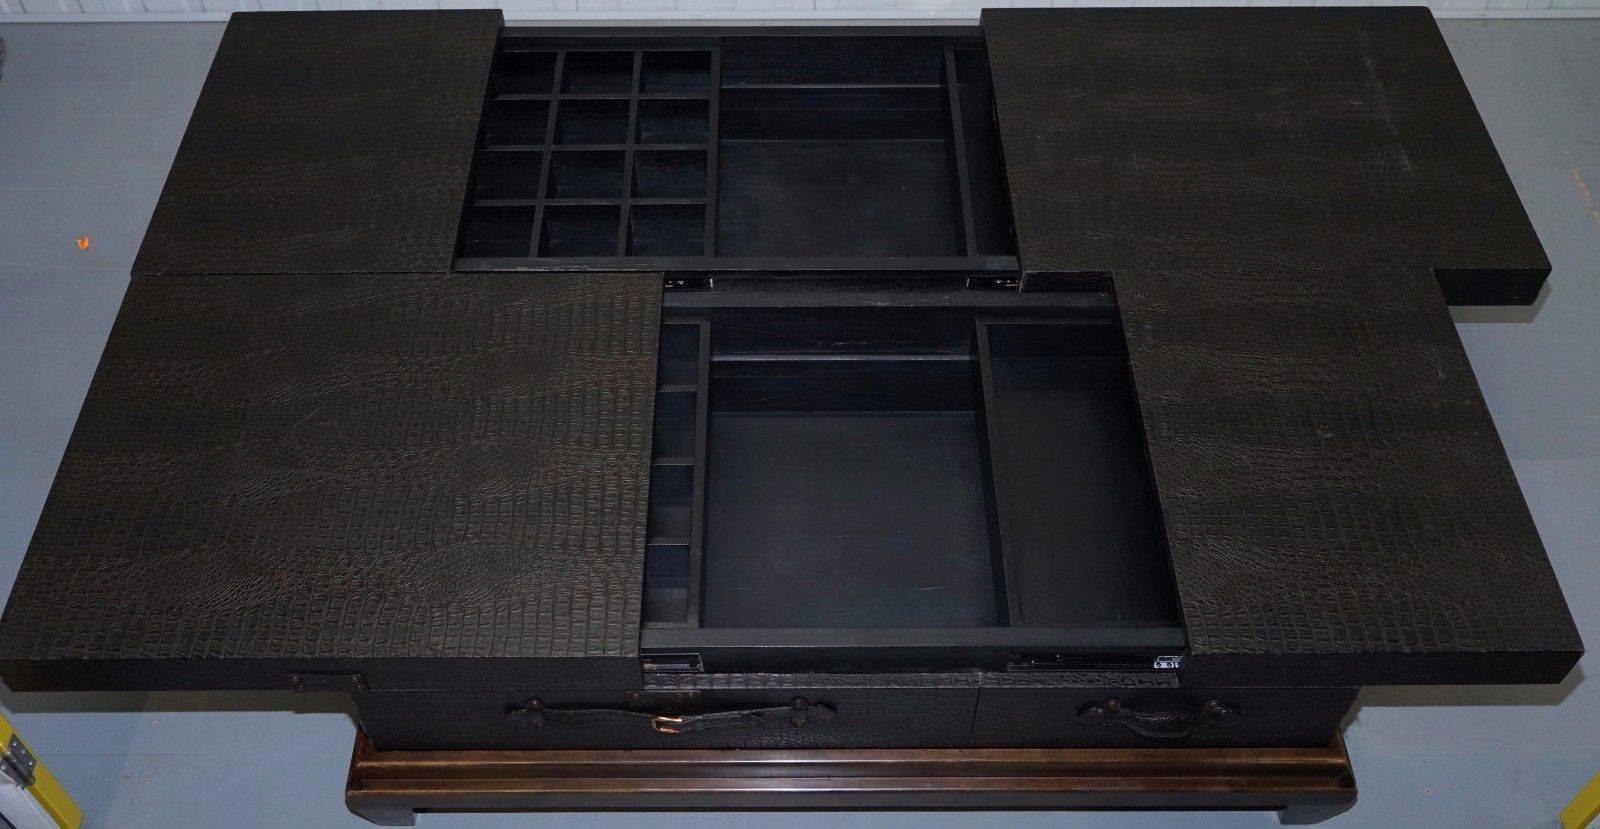 Unknown Huge Metamorphic Hidden Sliding Drawers Alligator Leather Luggage Coffee Table